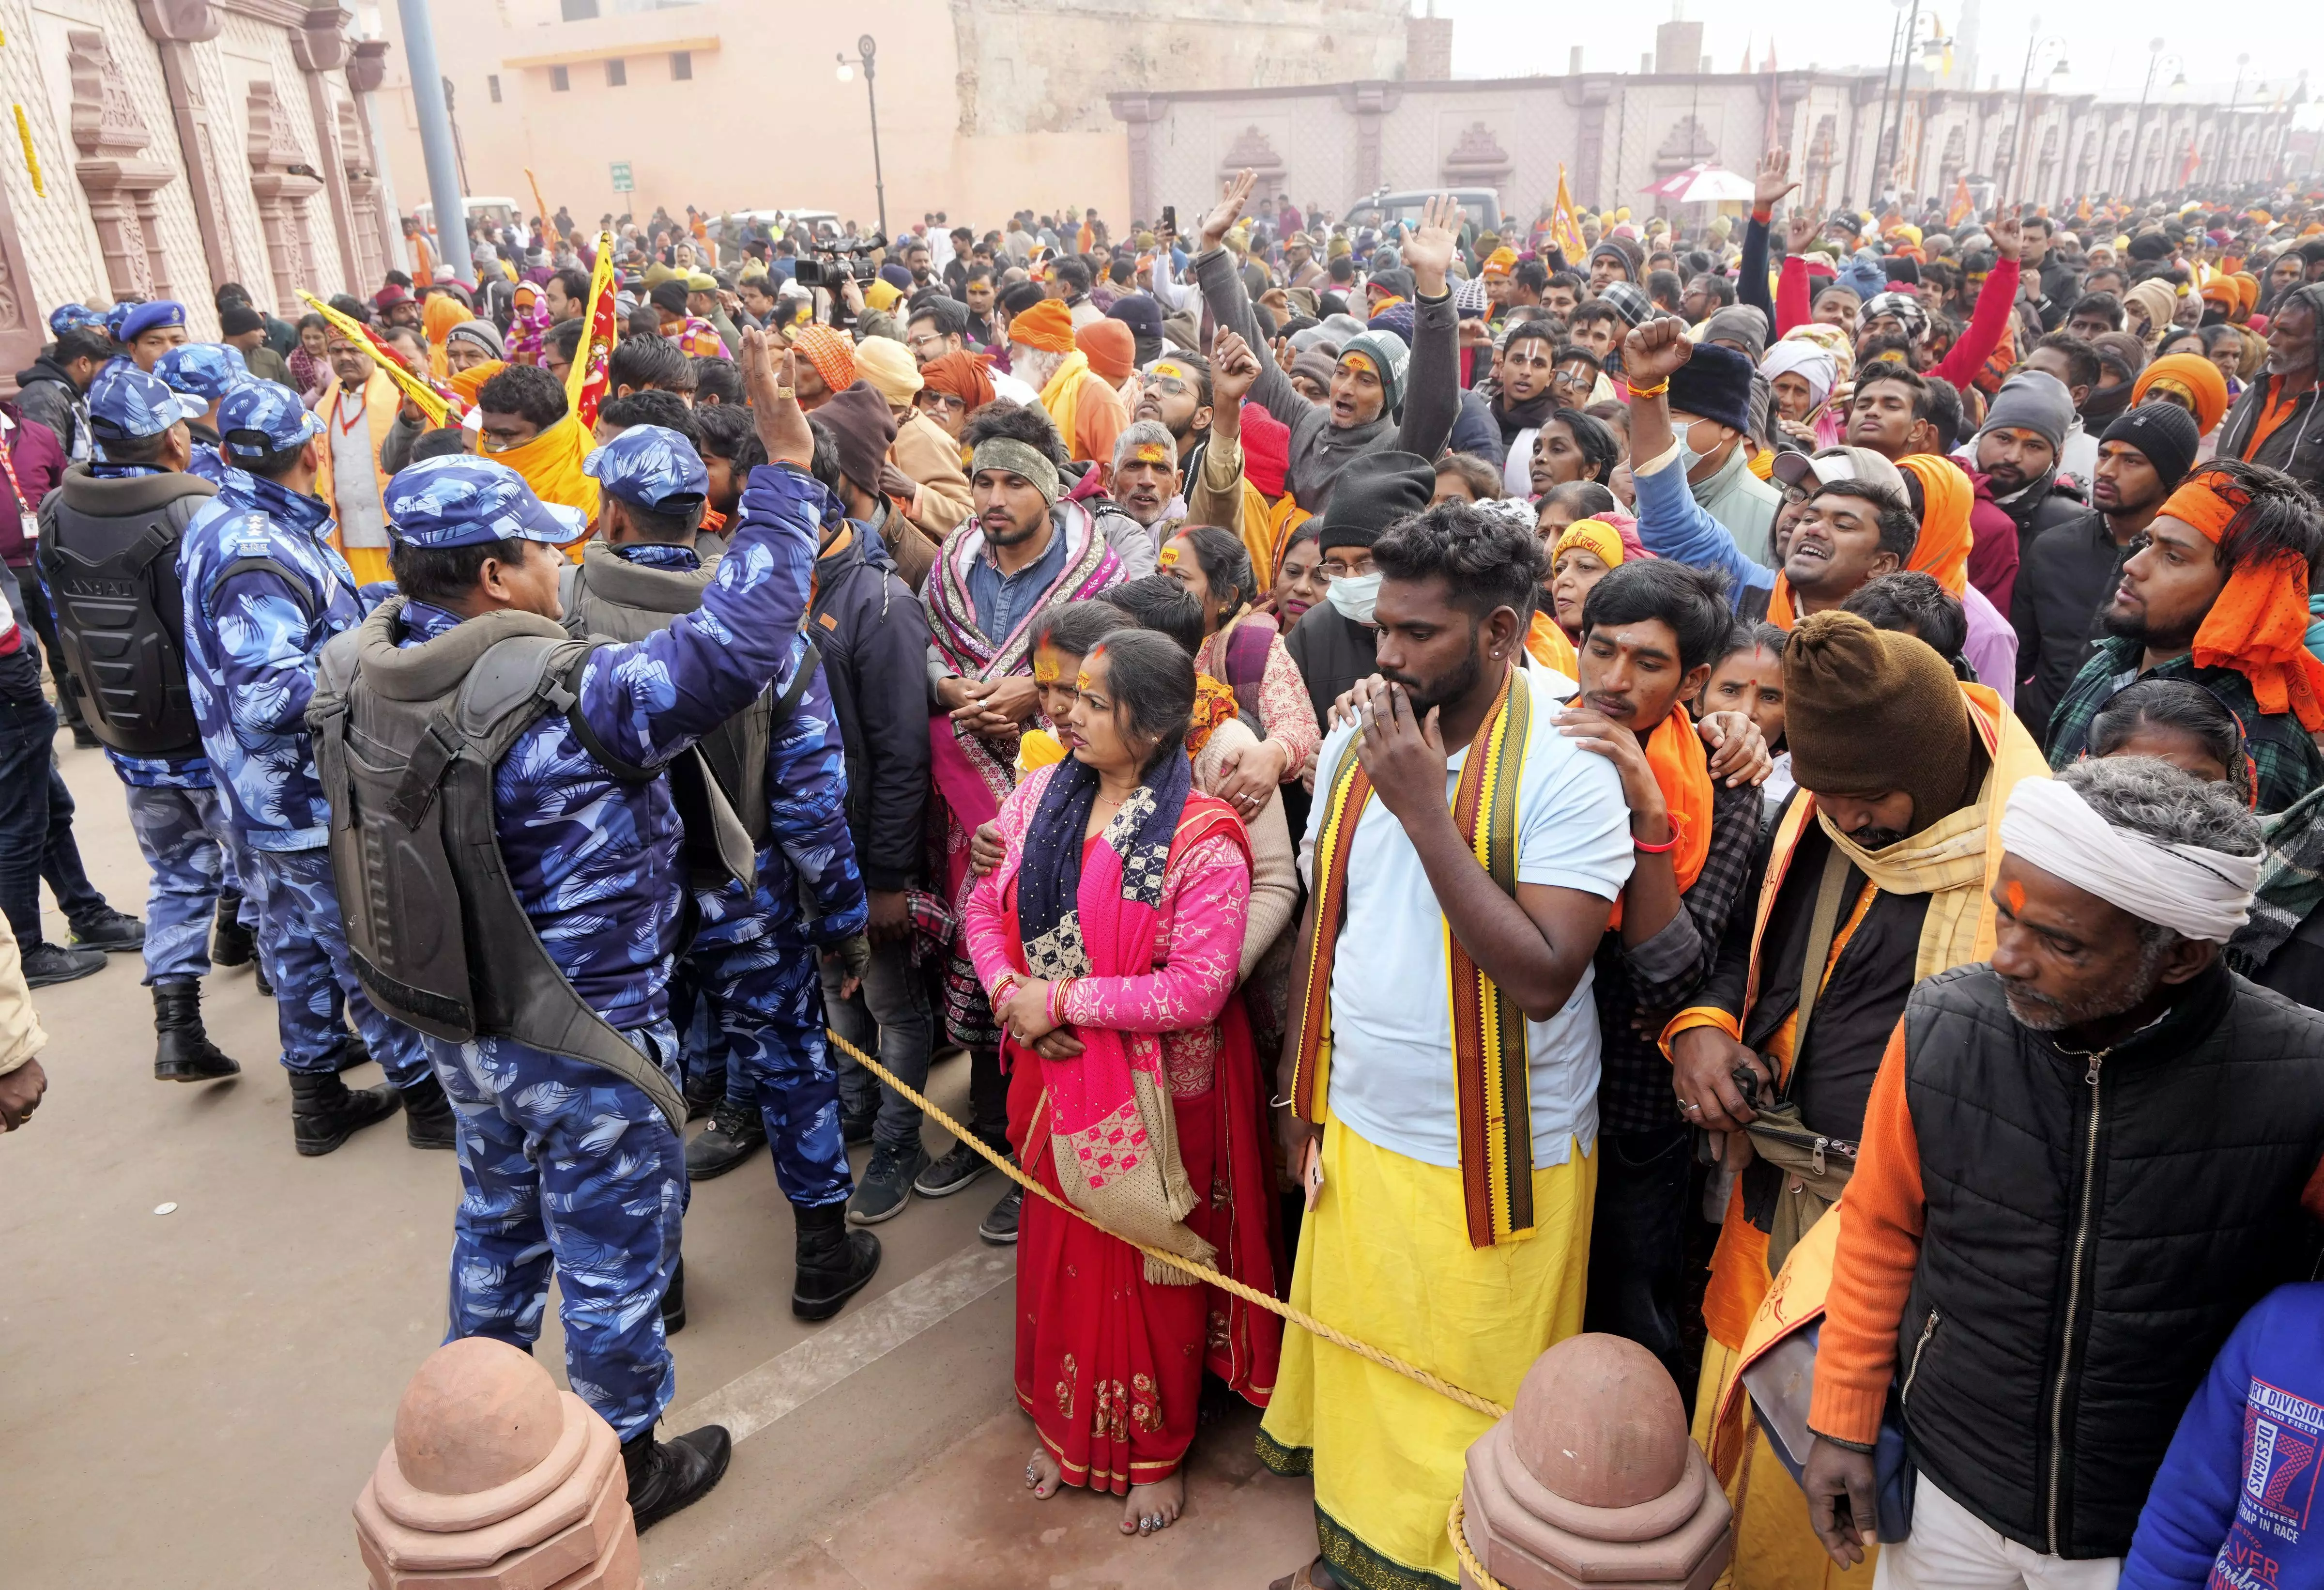 Devotees throng Ayodhya Ram temple on first day, security force struggle to control crowds